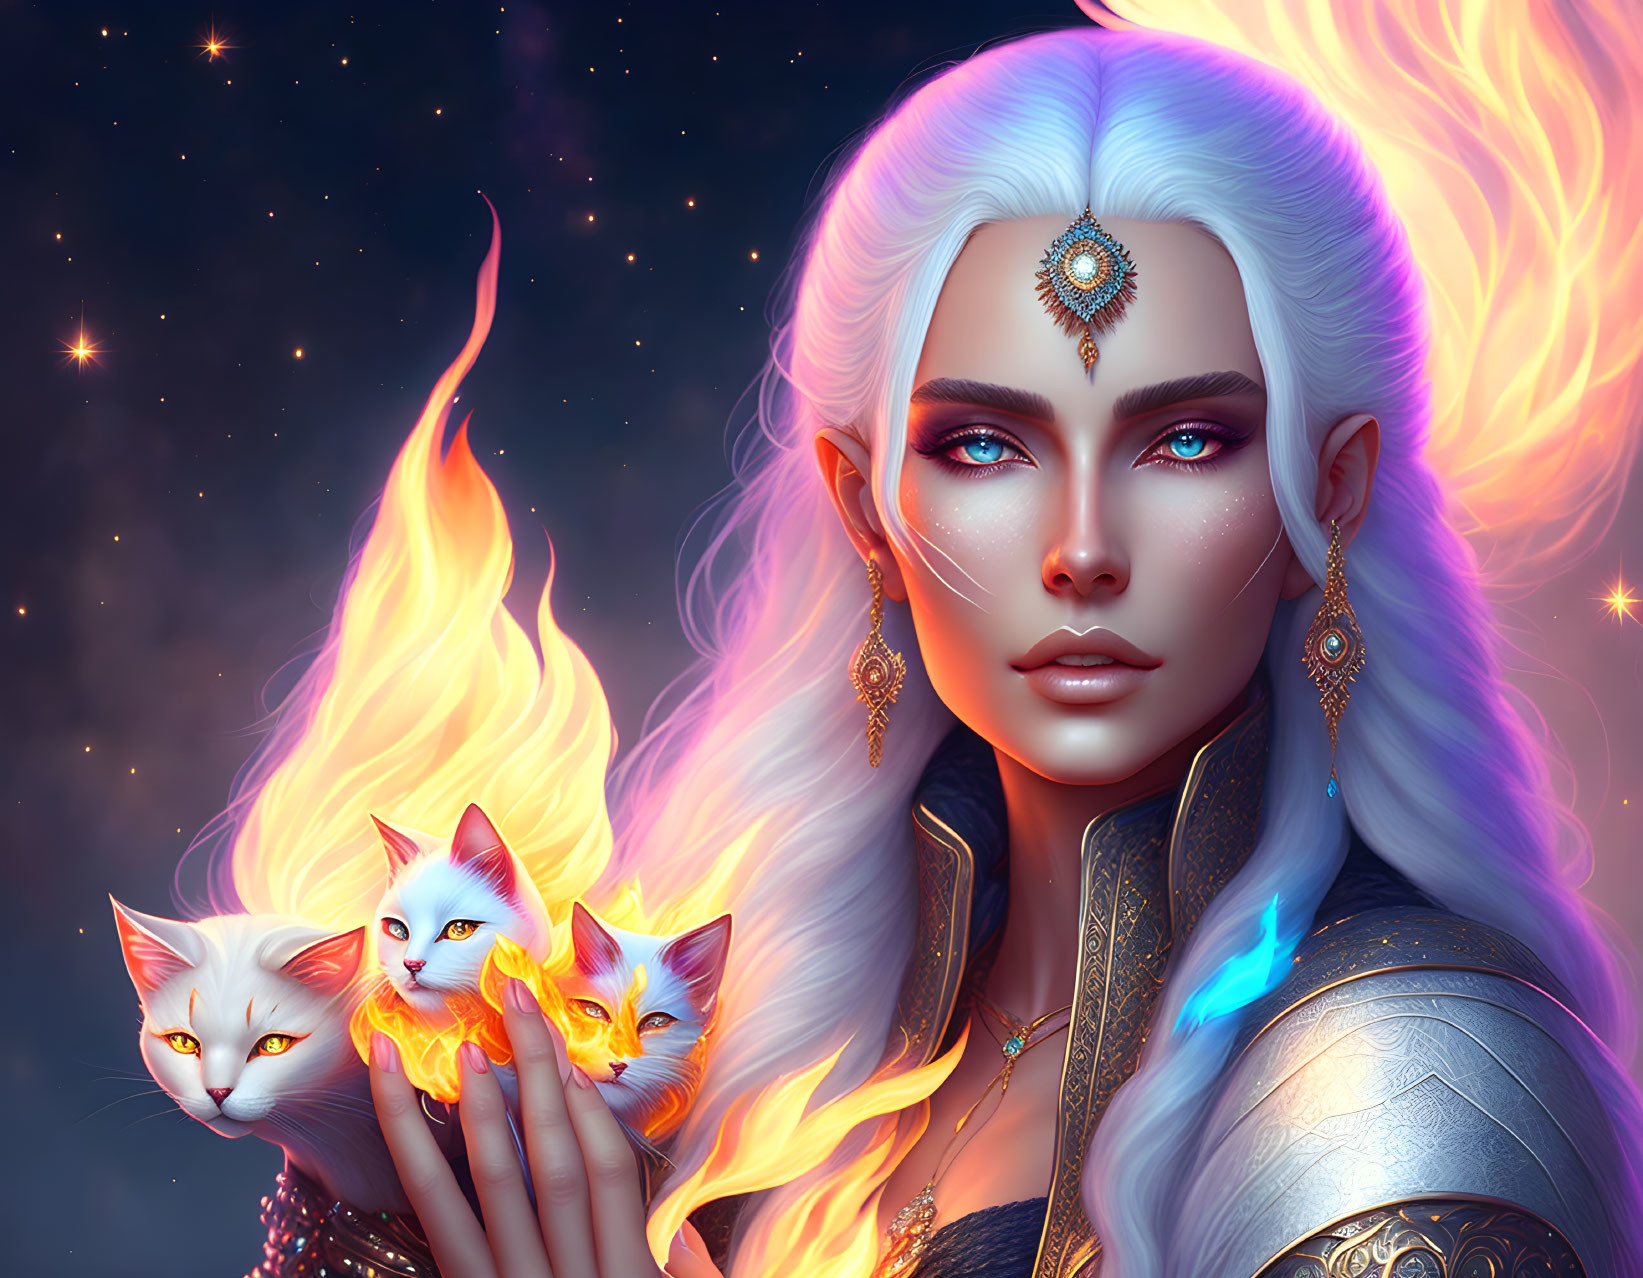 Ethereal woman with white hair holding three fiery-tailed cats against starry backdrop